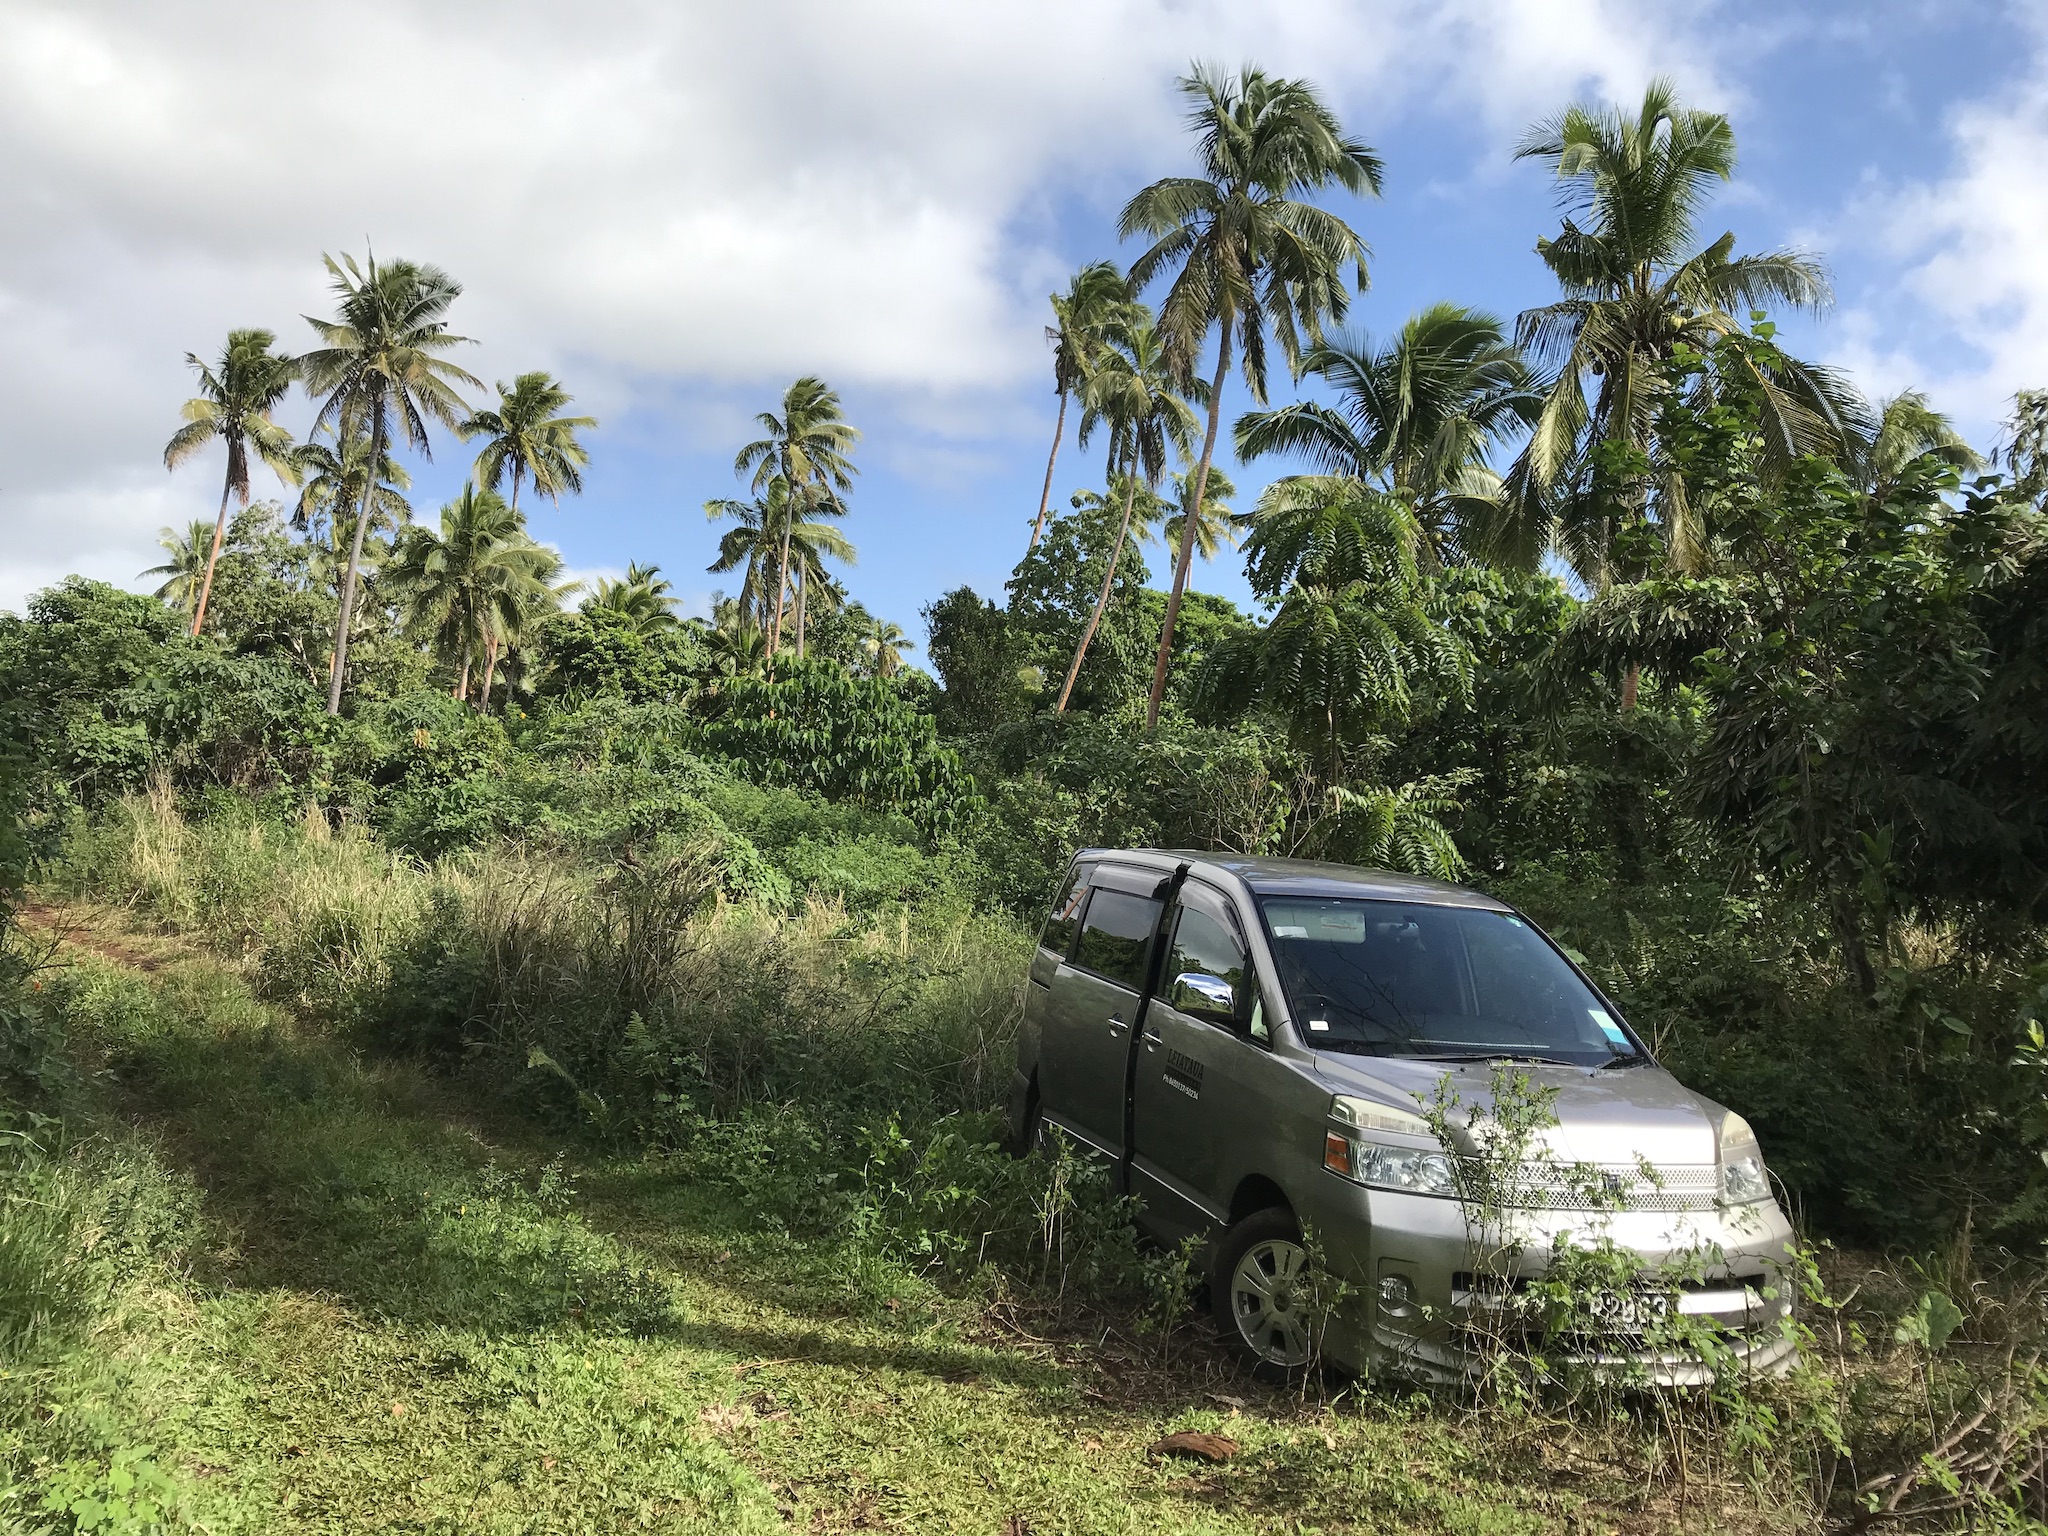 Our '4WD' rental car, parked as near as we dare to Houma Tahi beach. As it turned out, the hike to the beach took us nearly an hour.